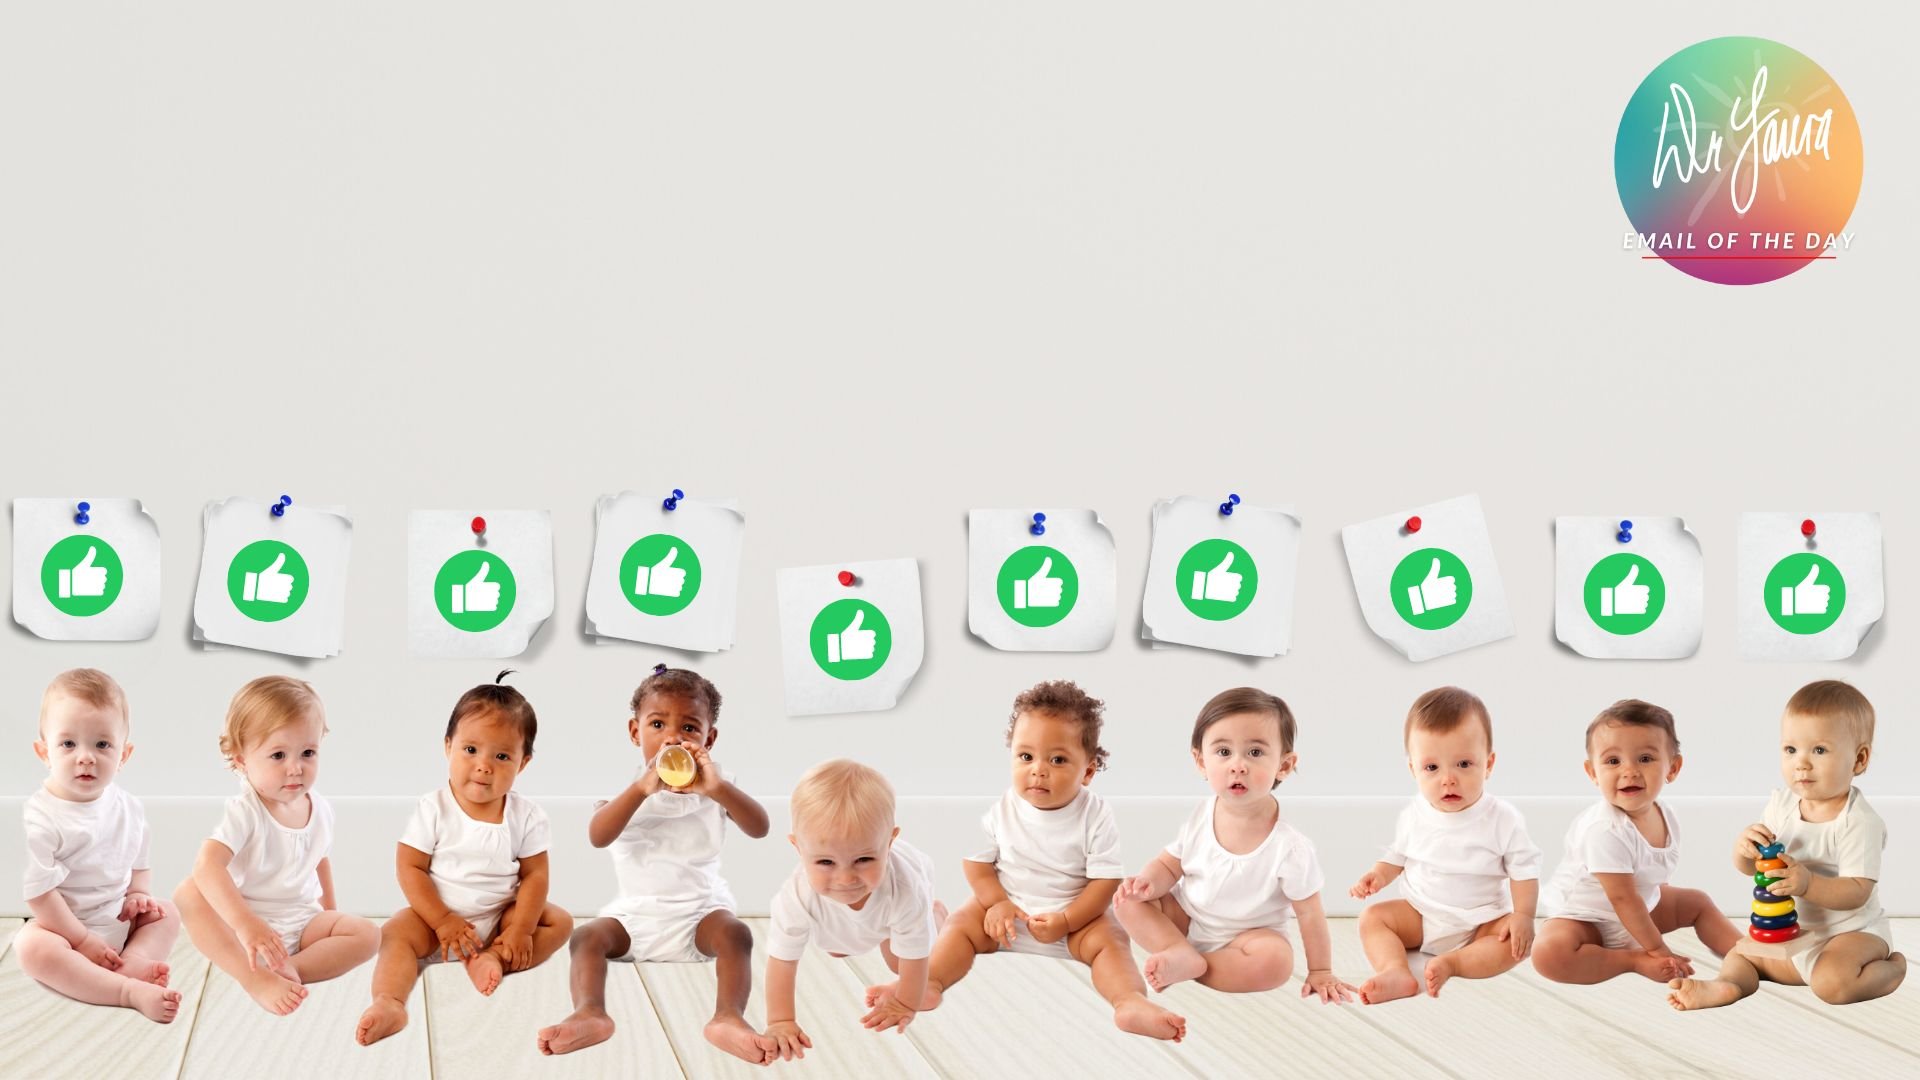 A line of sitting babies have thumbs up signs above their heads